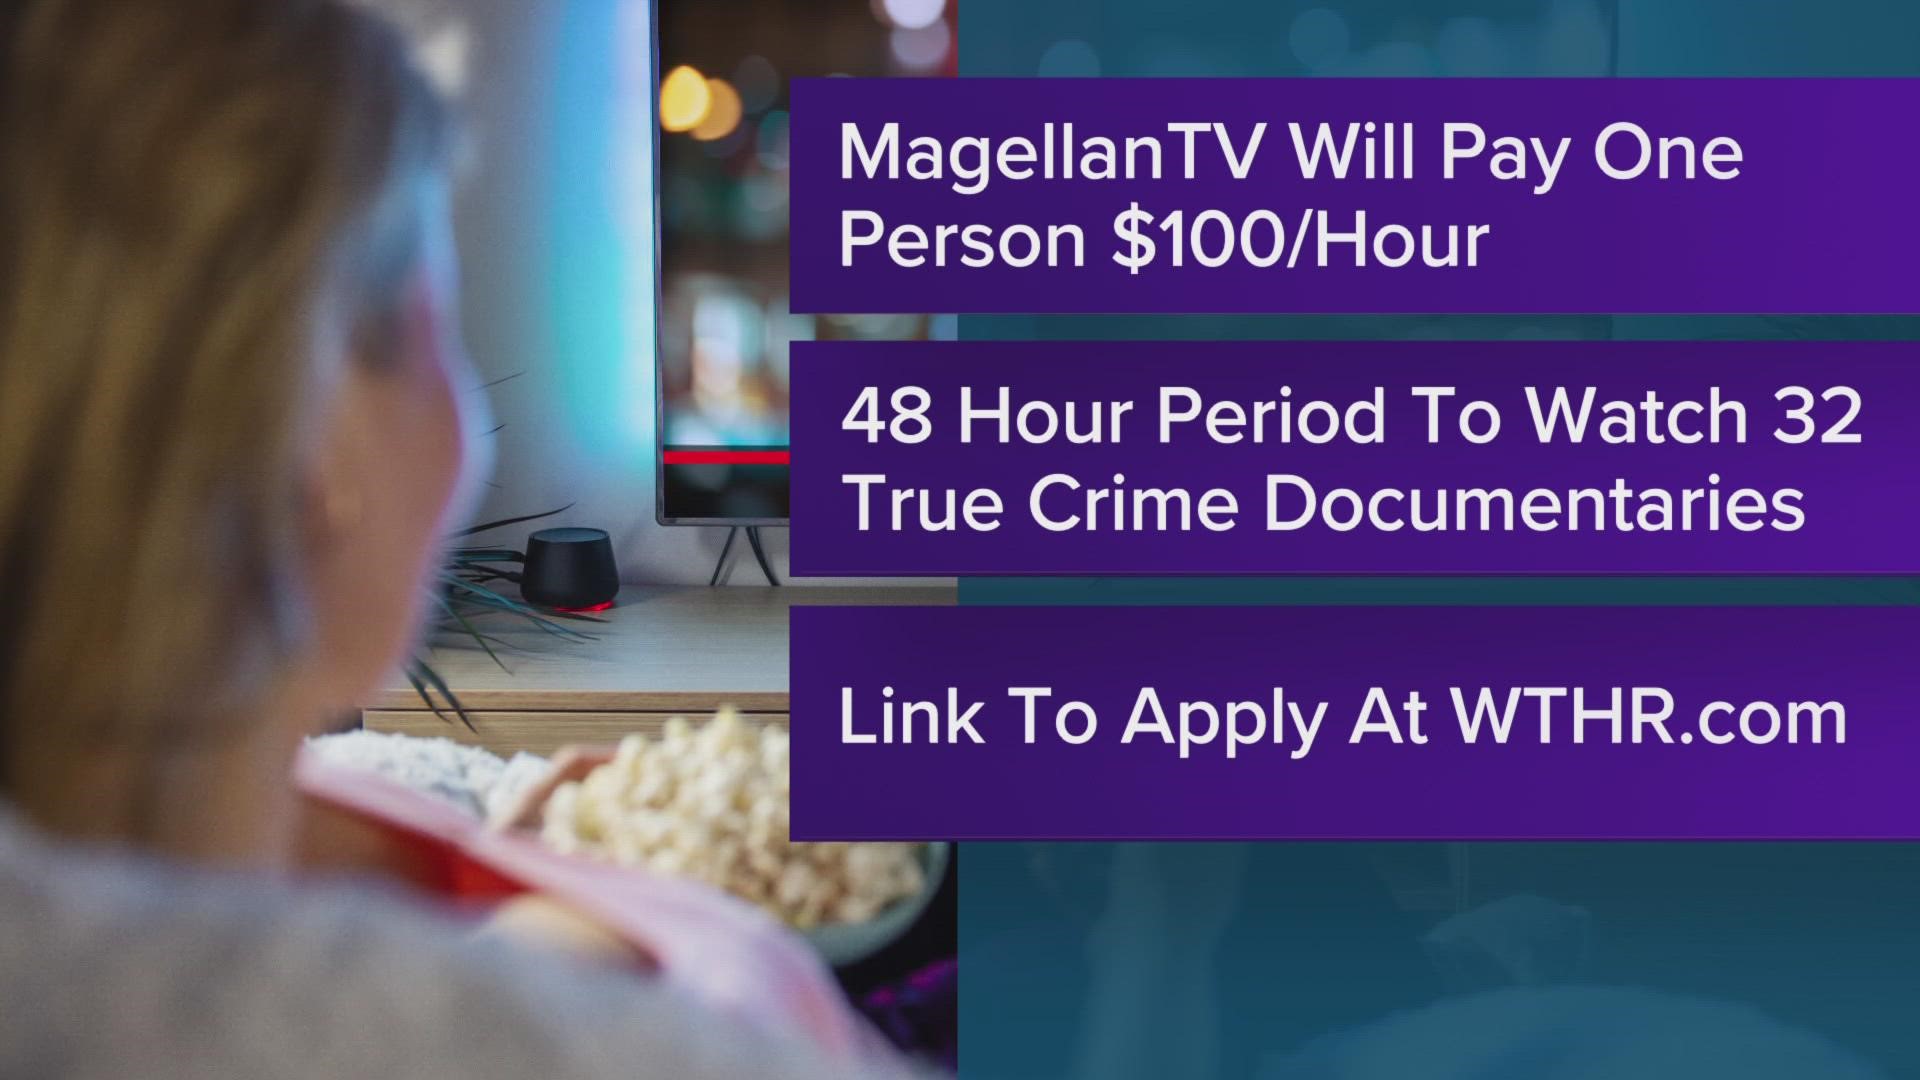 Think you got what it takes? Head to WTHR.com.